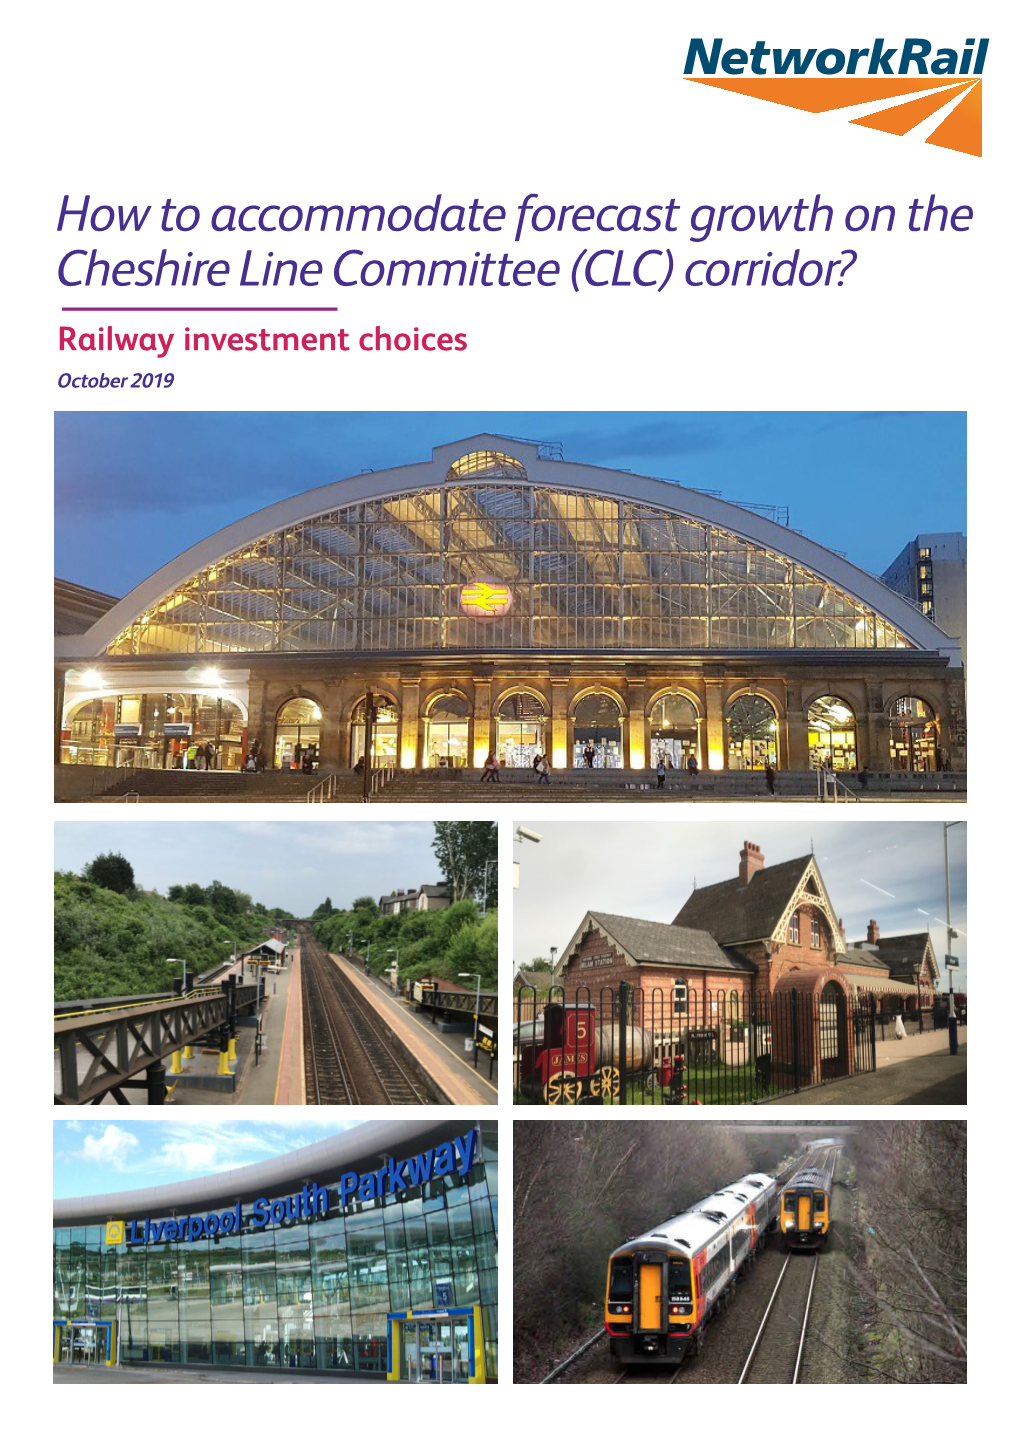 How to Accommodate Forcast Growth on the Cheshire Line Corridor